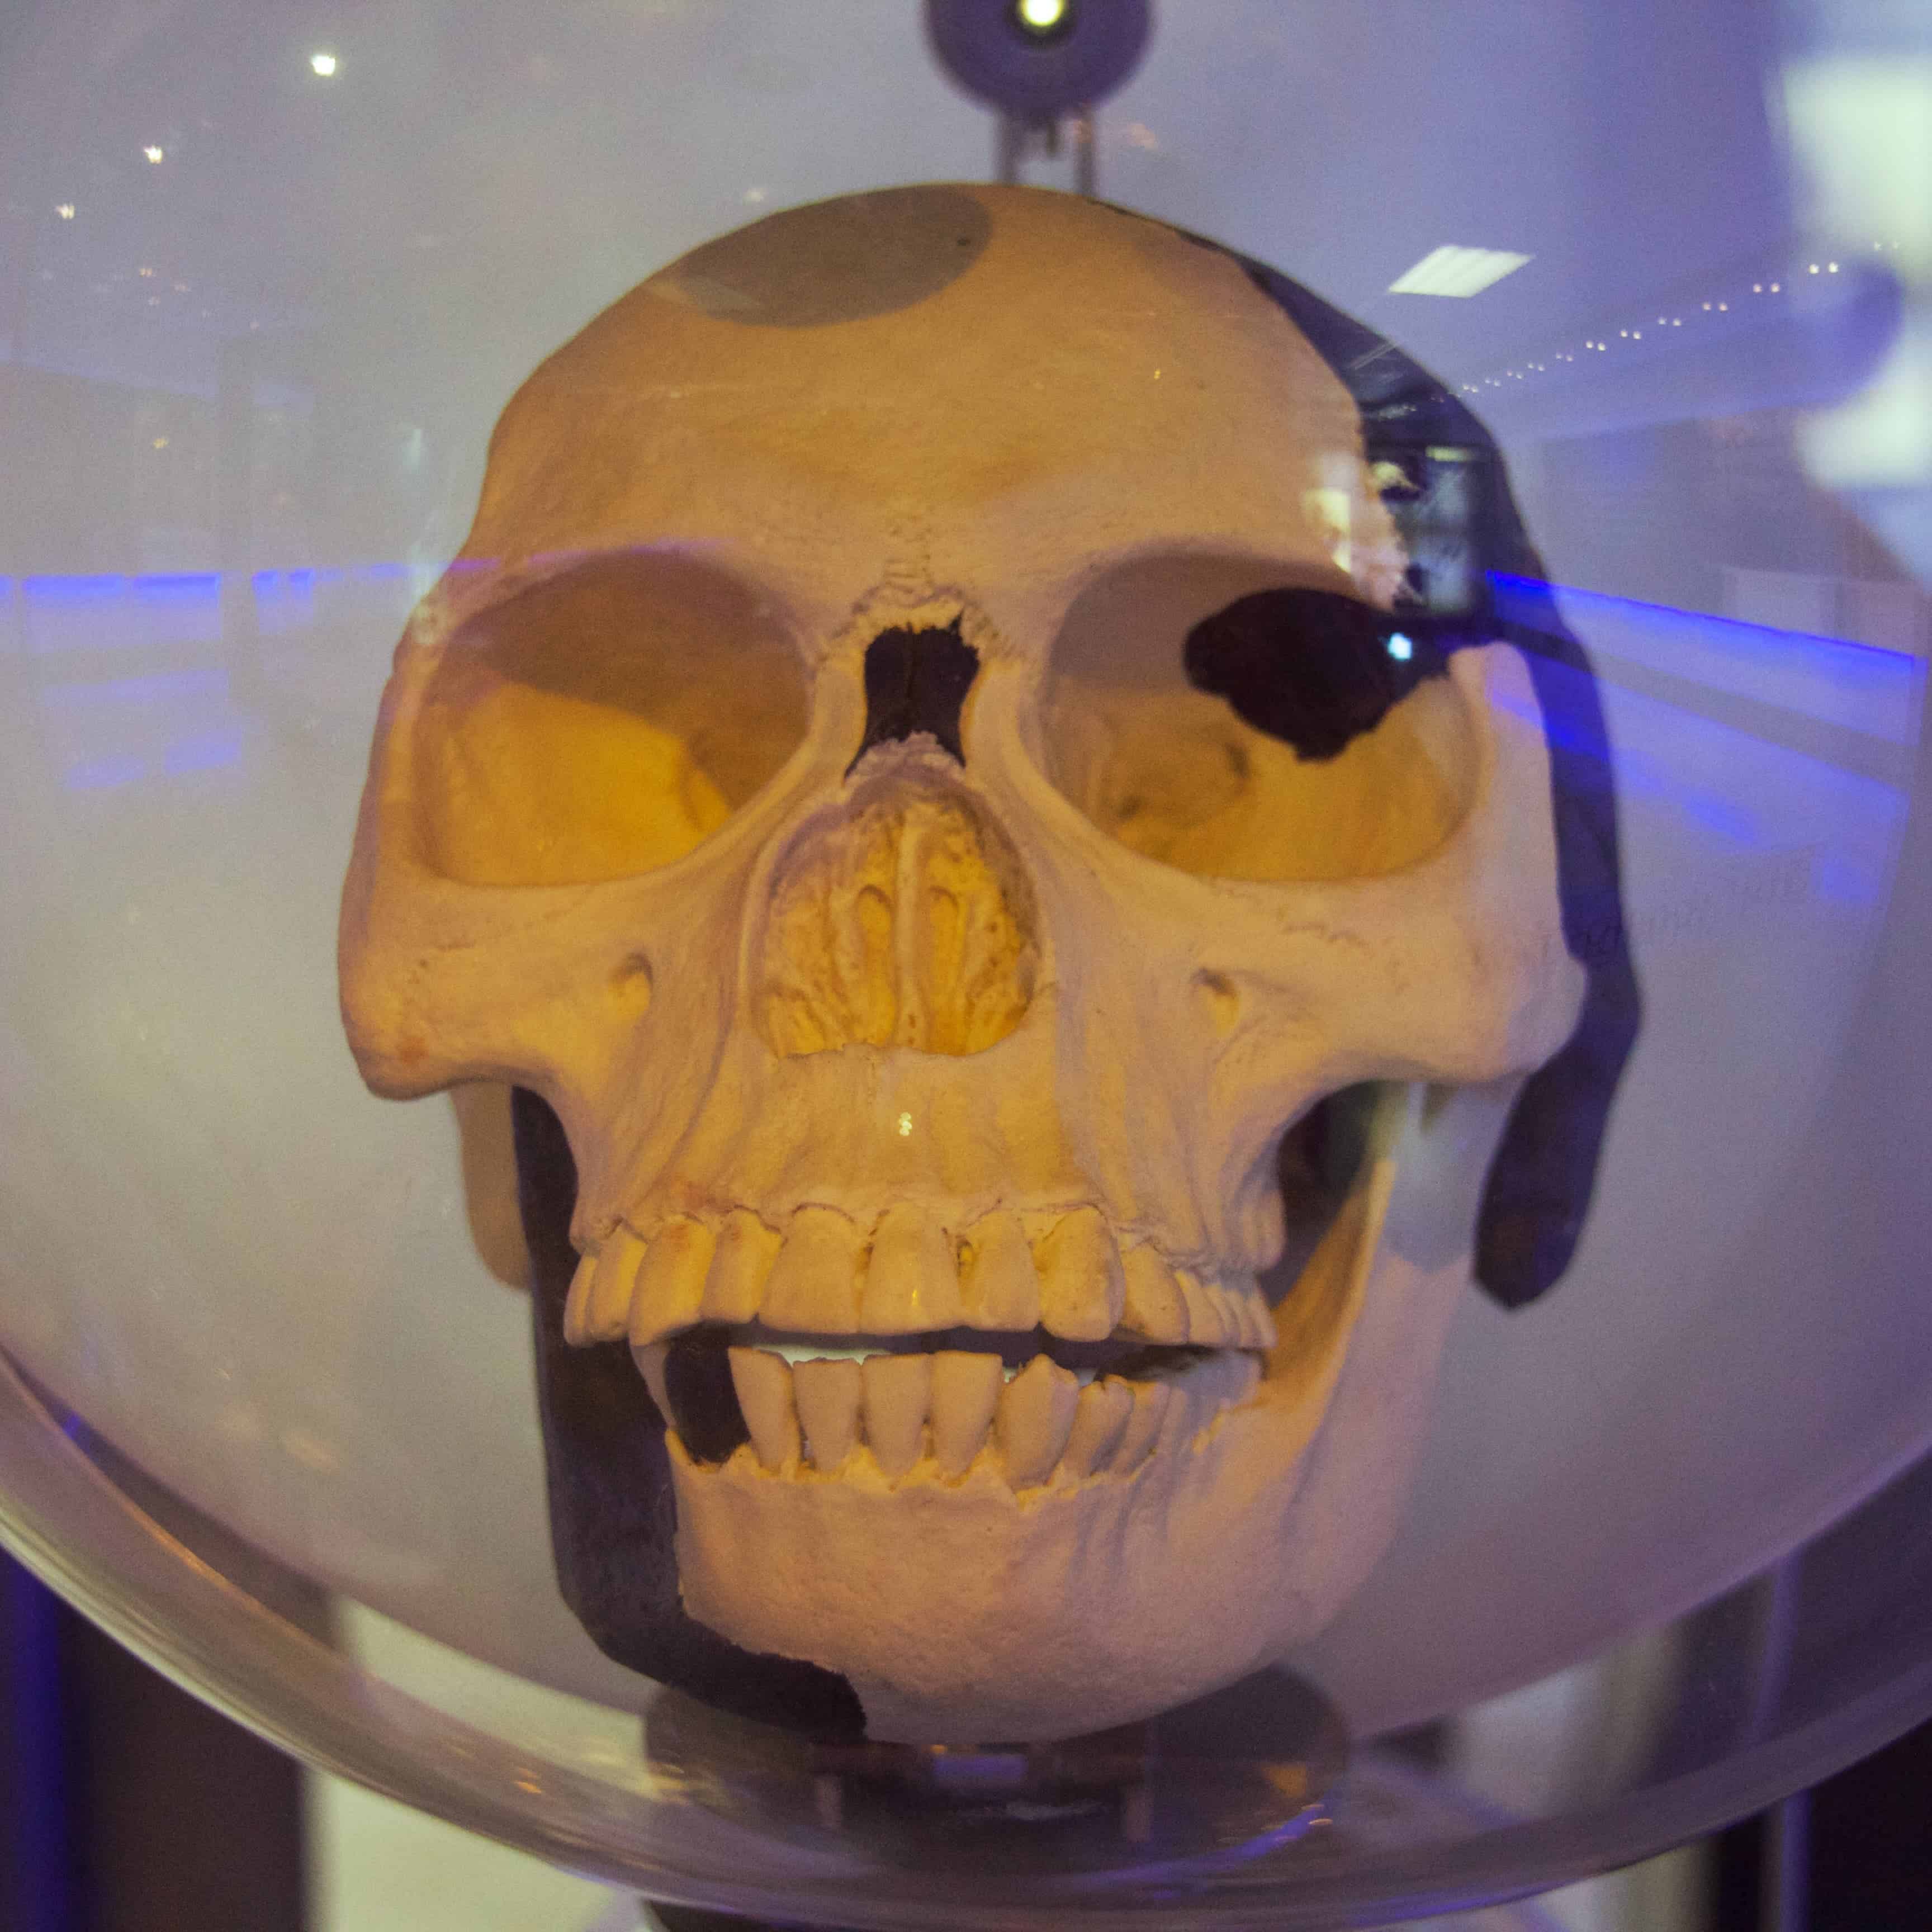 A replica of the Piltdown Man skull. Photo by Mike Peel.